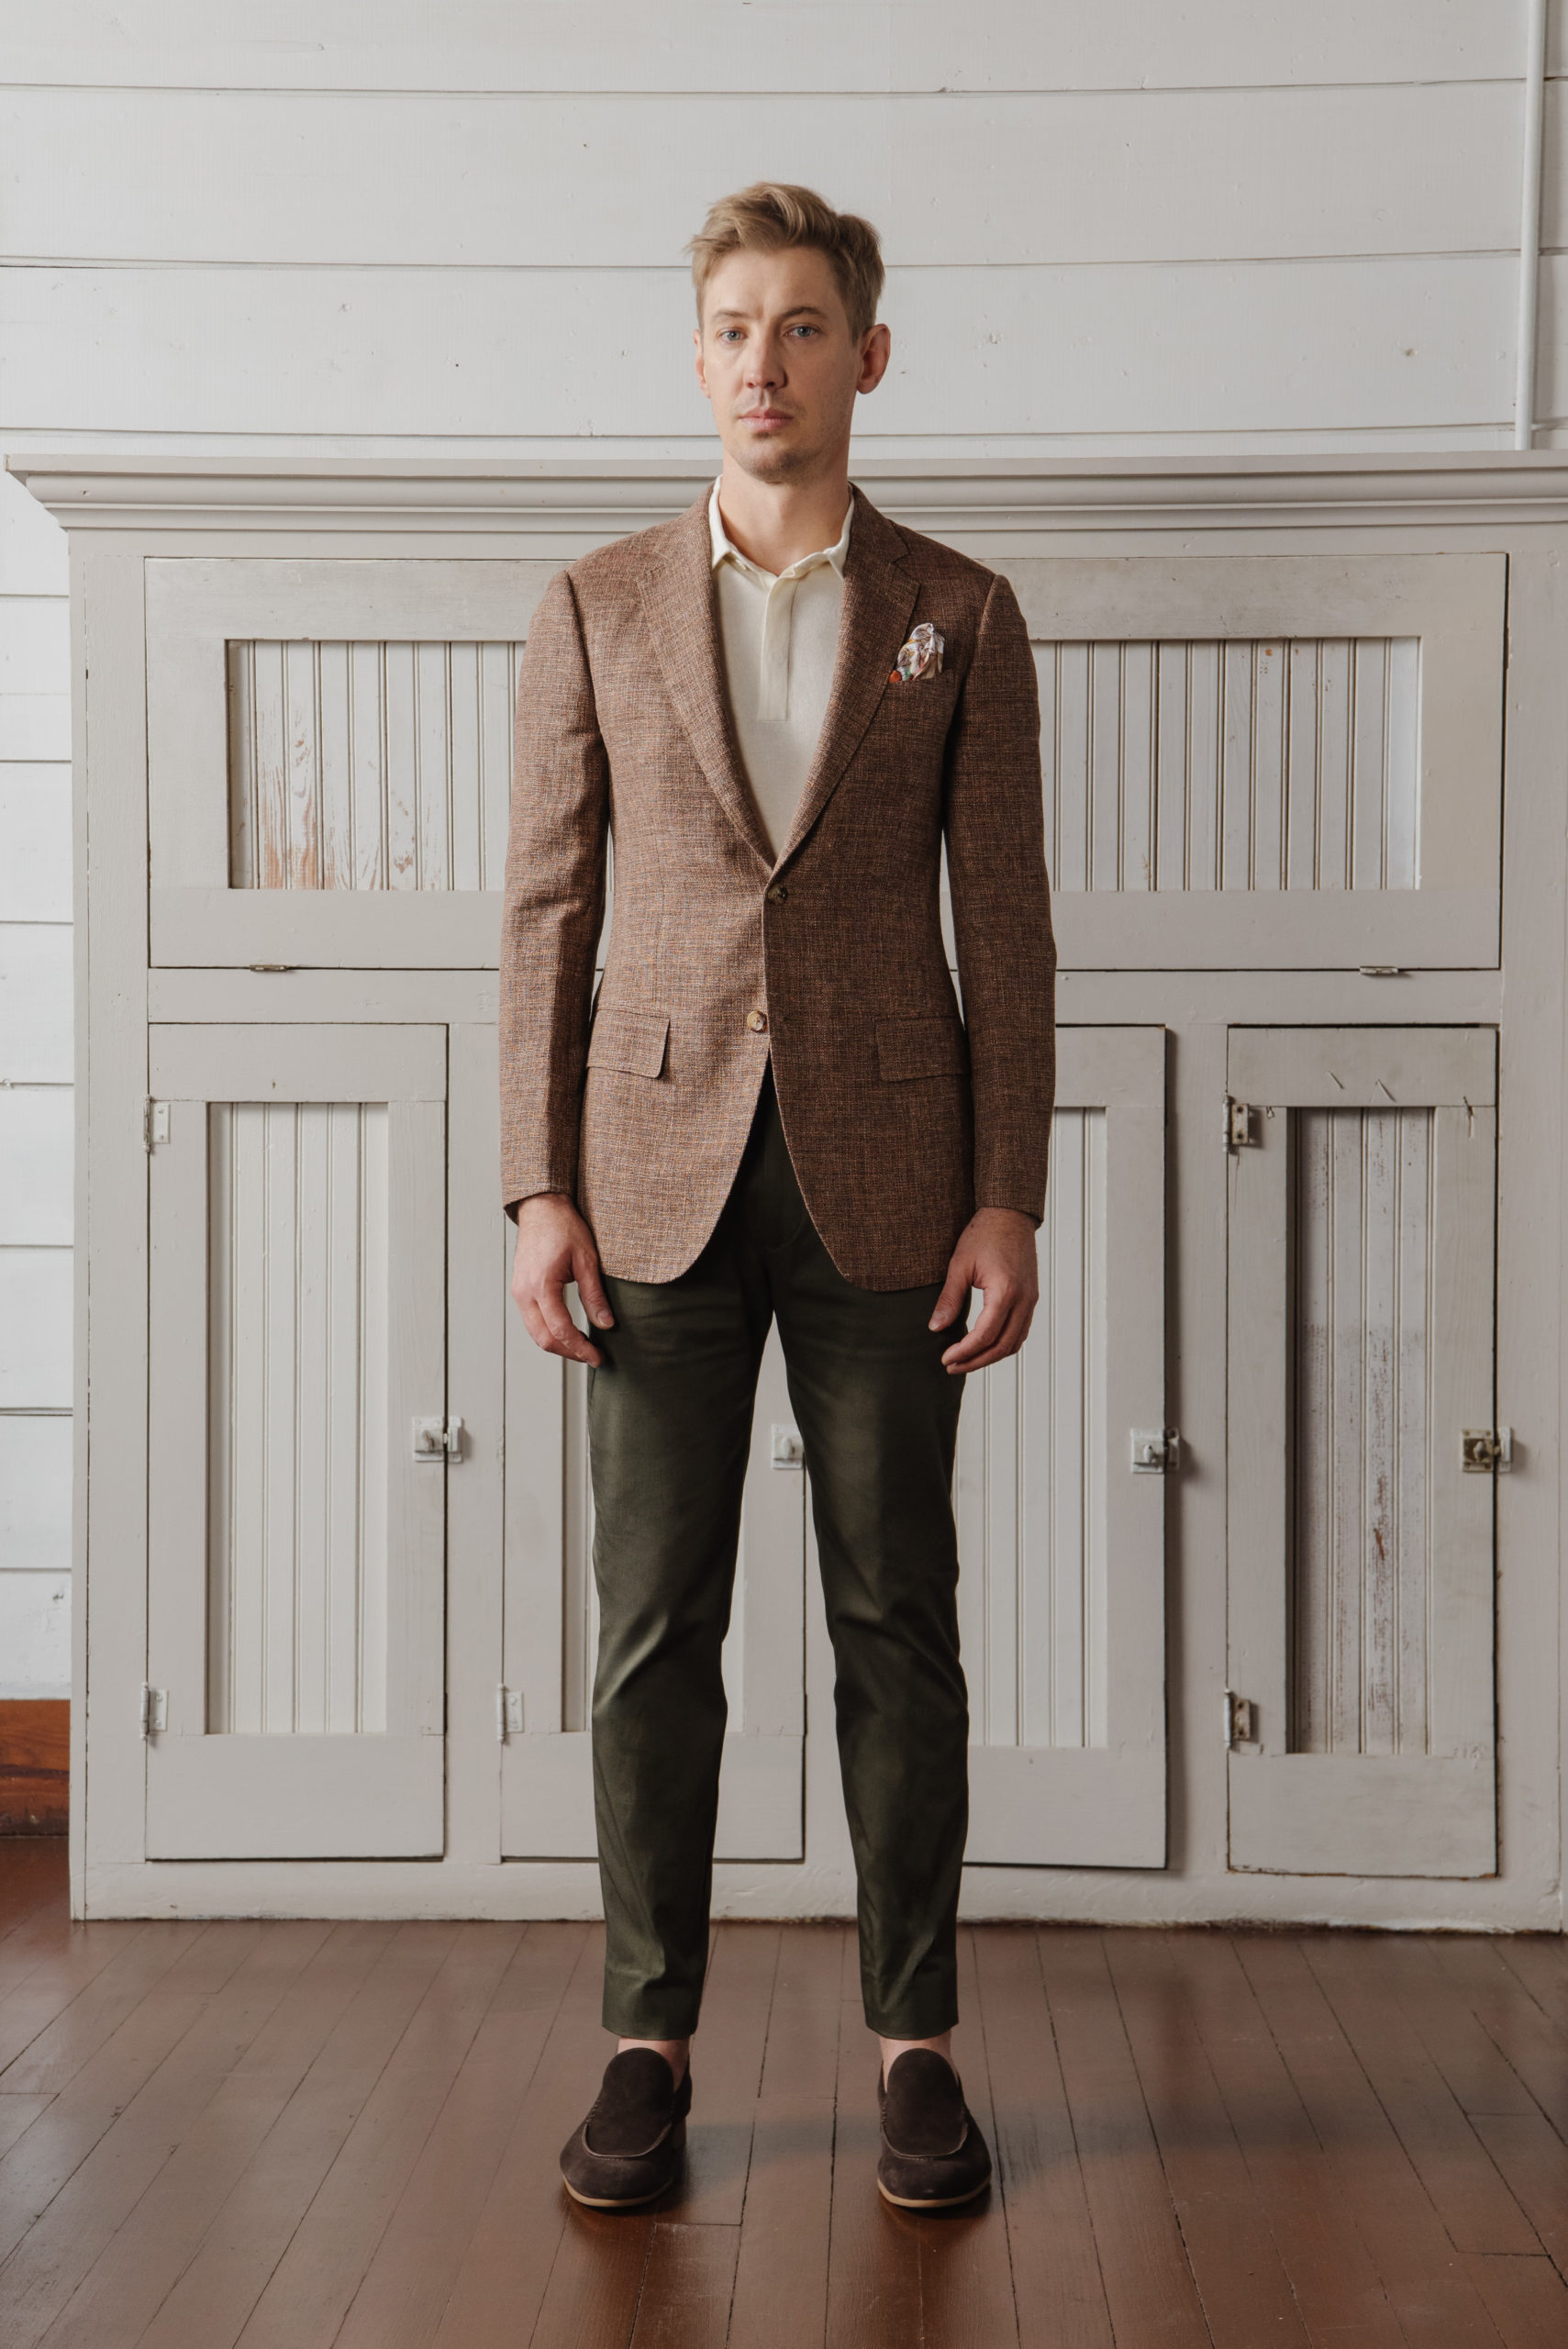 http://harperandjones.com/wp-content/uploads/2022/02/Scabal-Multi-Brown-Sportcoat-in-LinenWoolCotton-Textured-Weave-Holland-Sherry-Olive-Cotton-Chino-HJ-Ivory-SilkCashmere-Henley-Knit-scaled.jpg